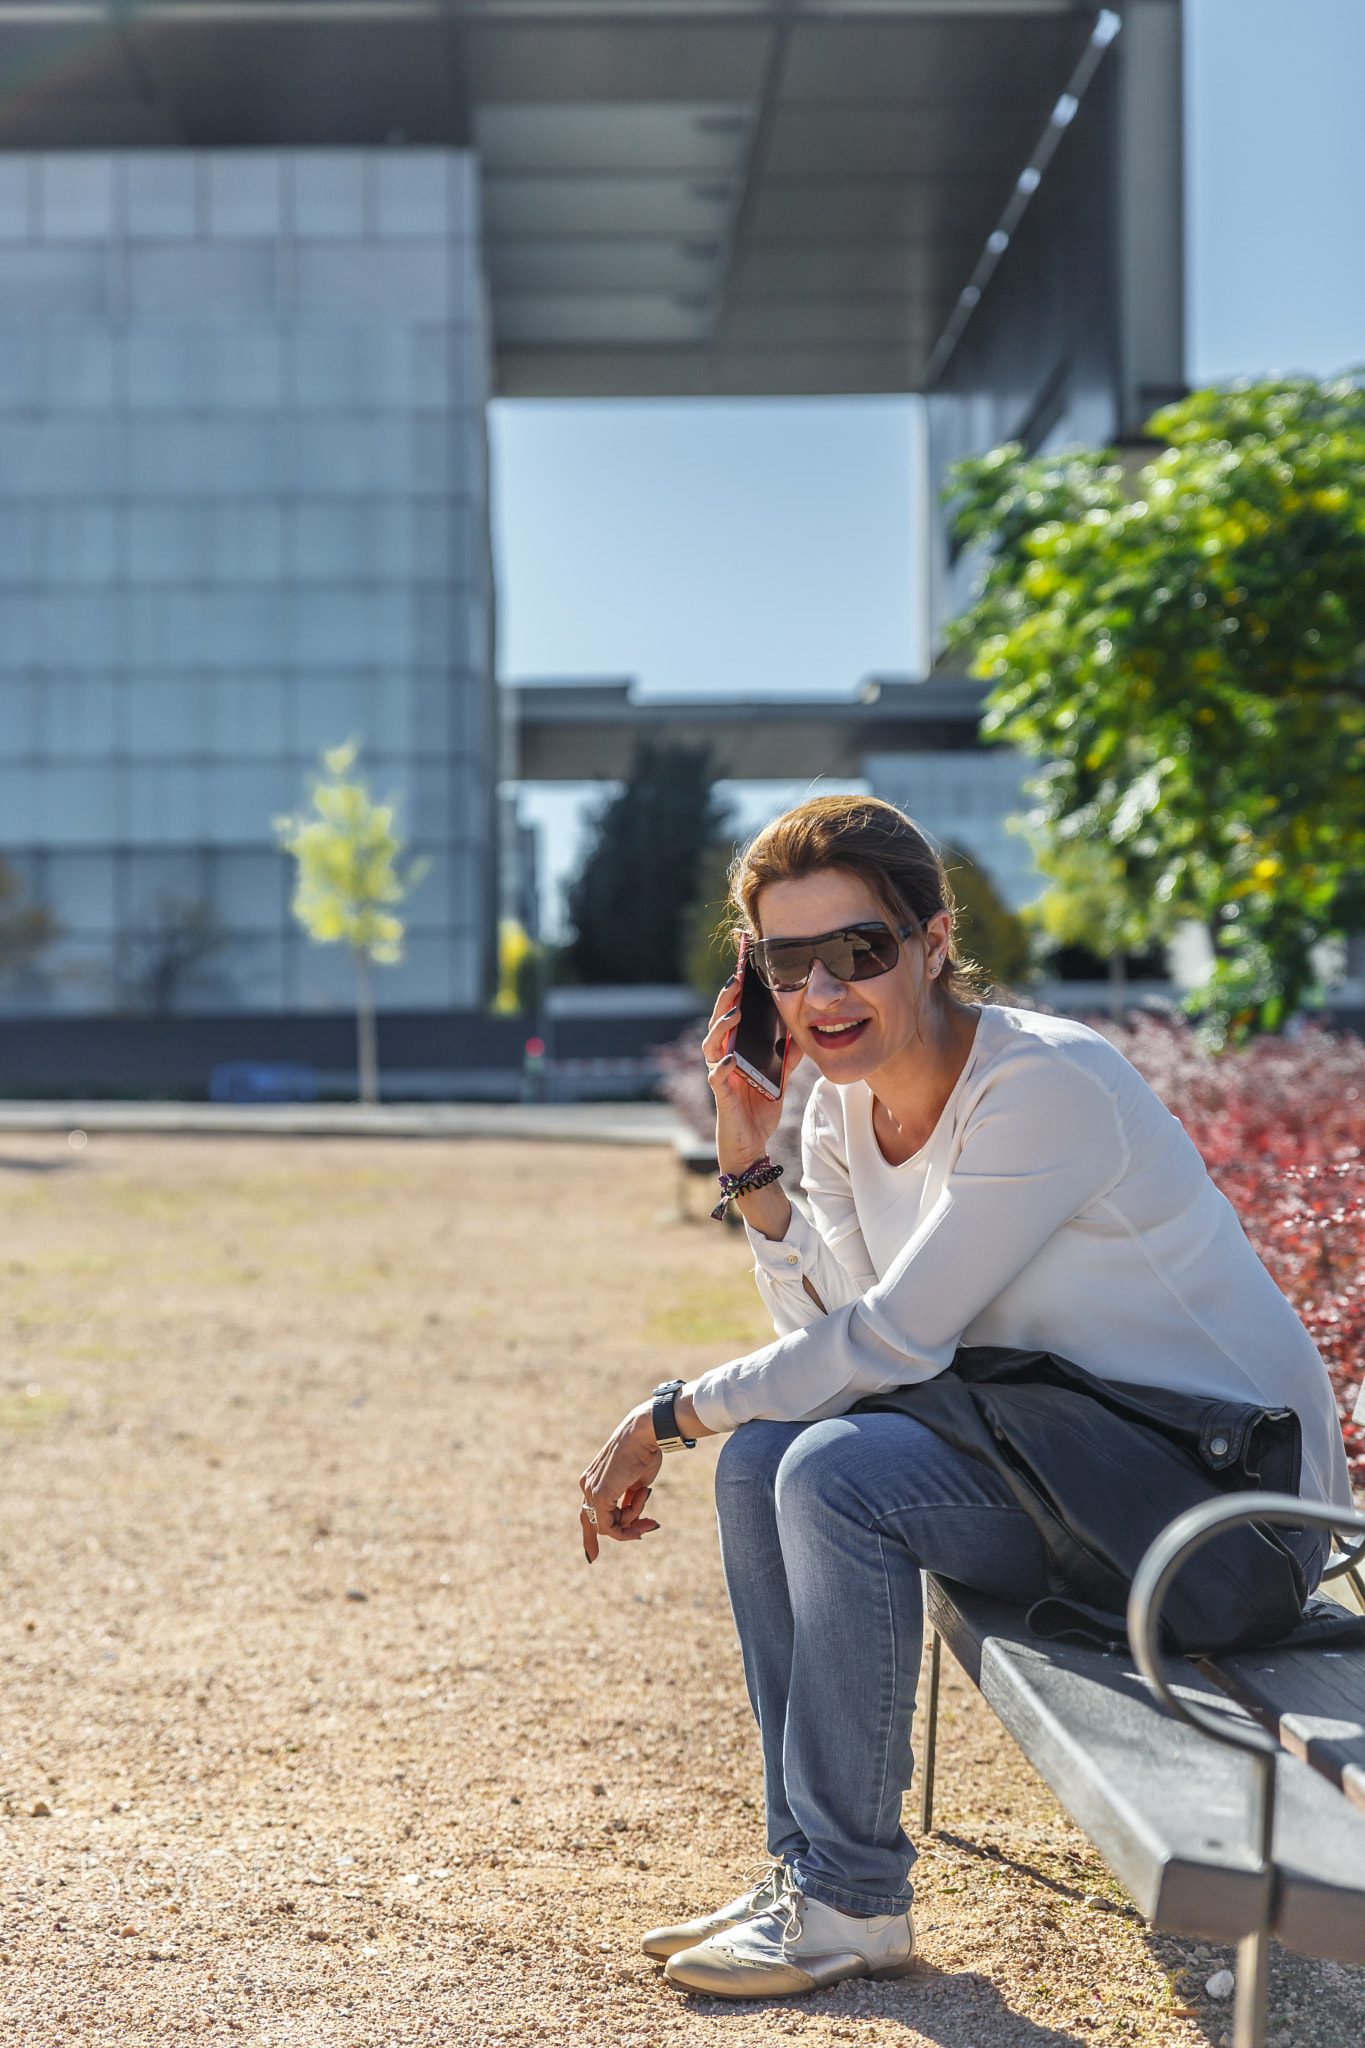 A woman smiles while talking on mobile phone, sitting on the ben